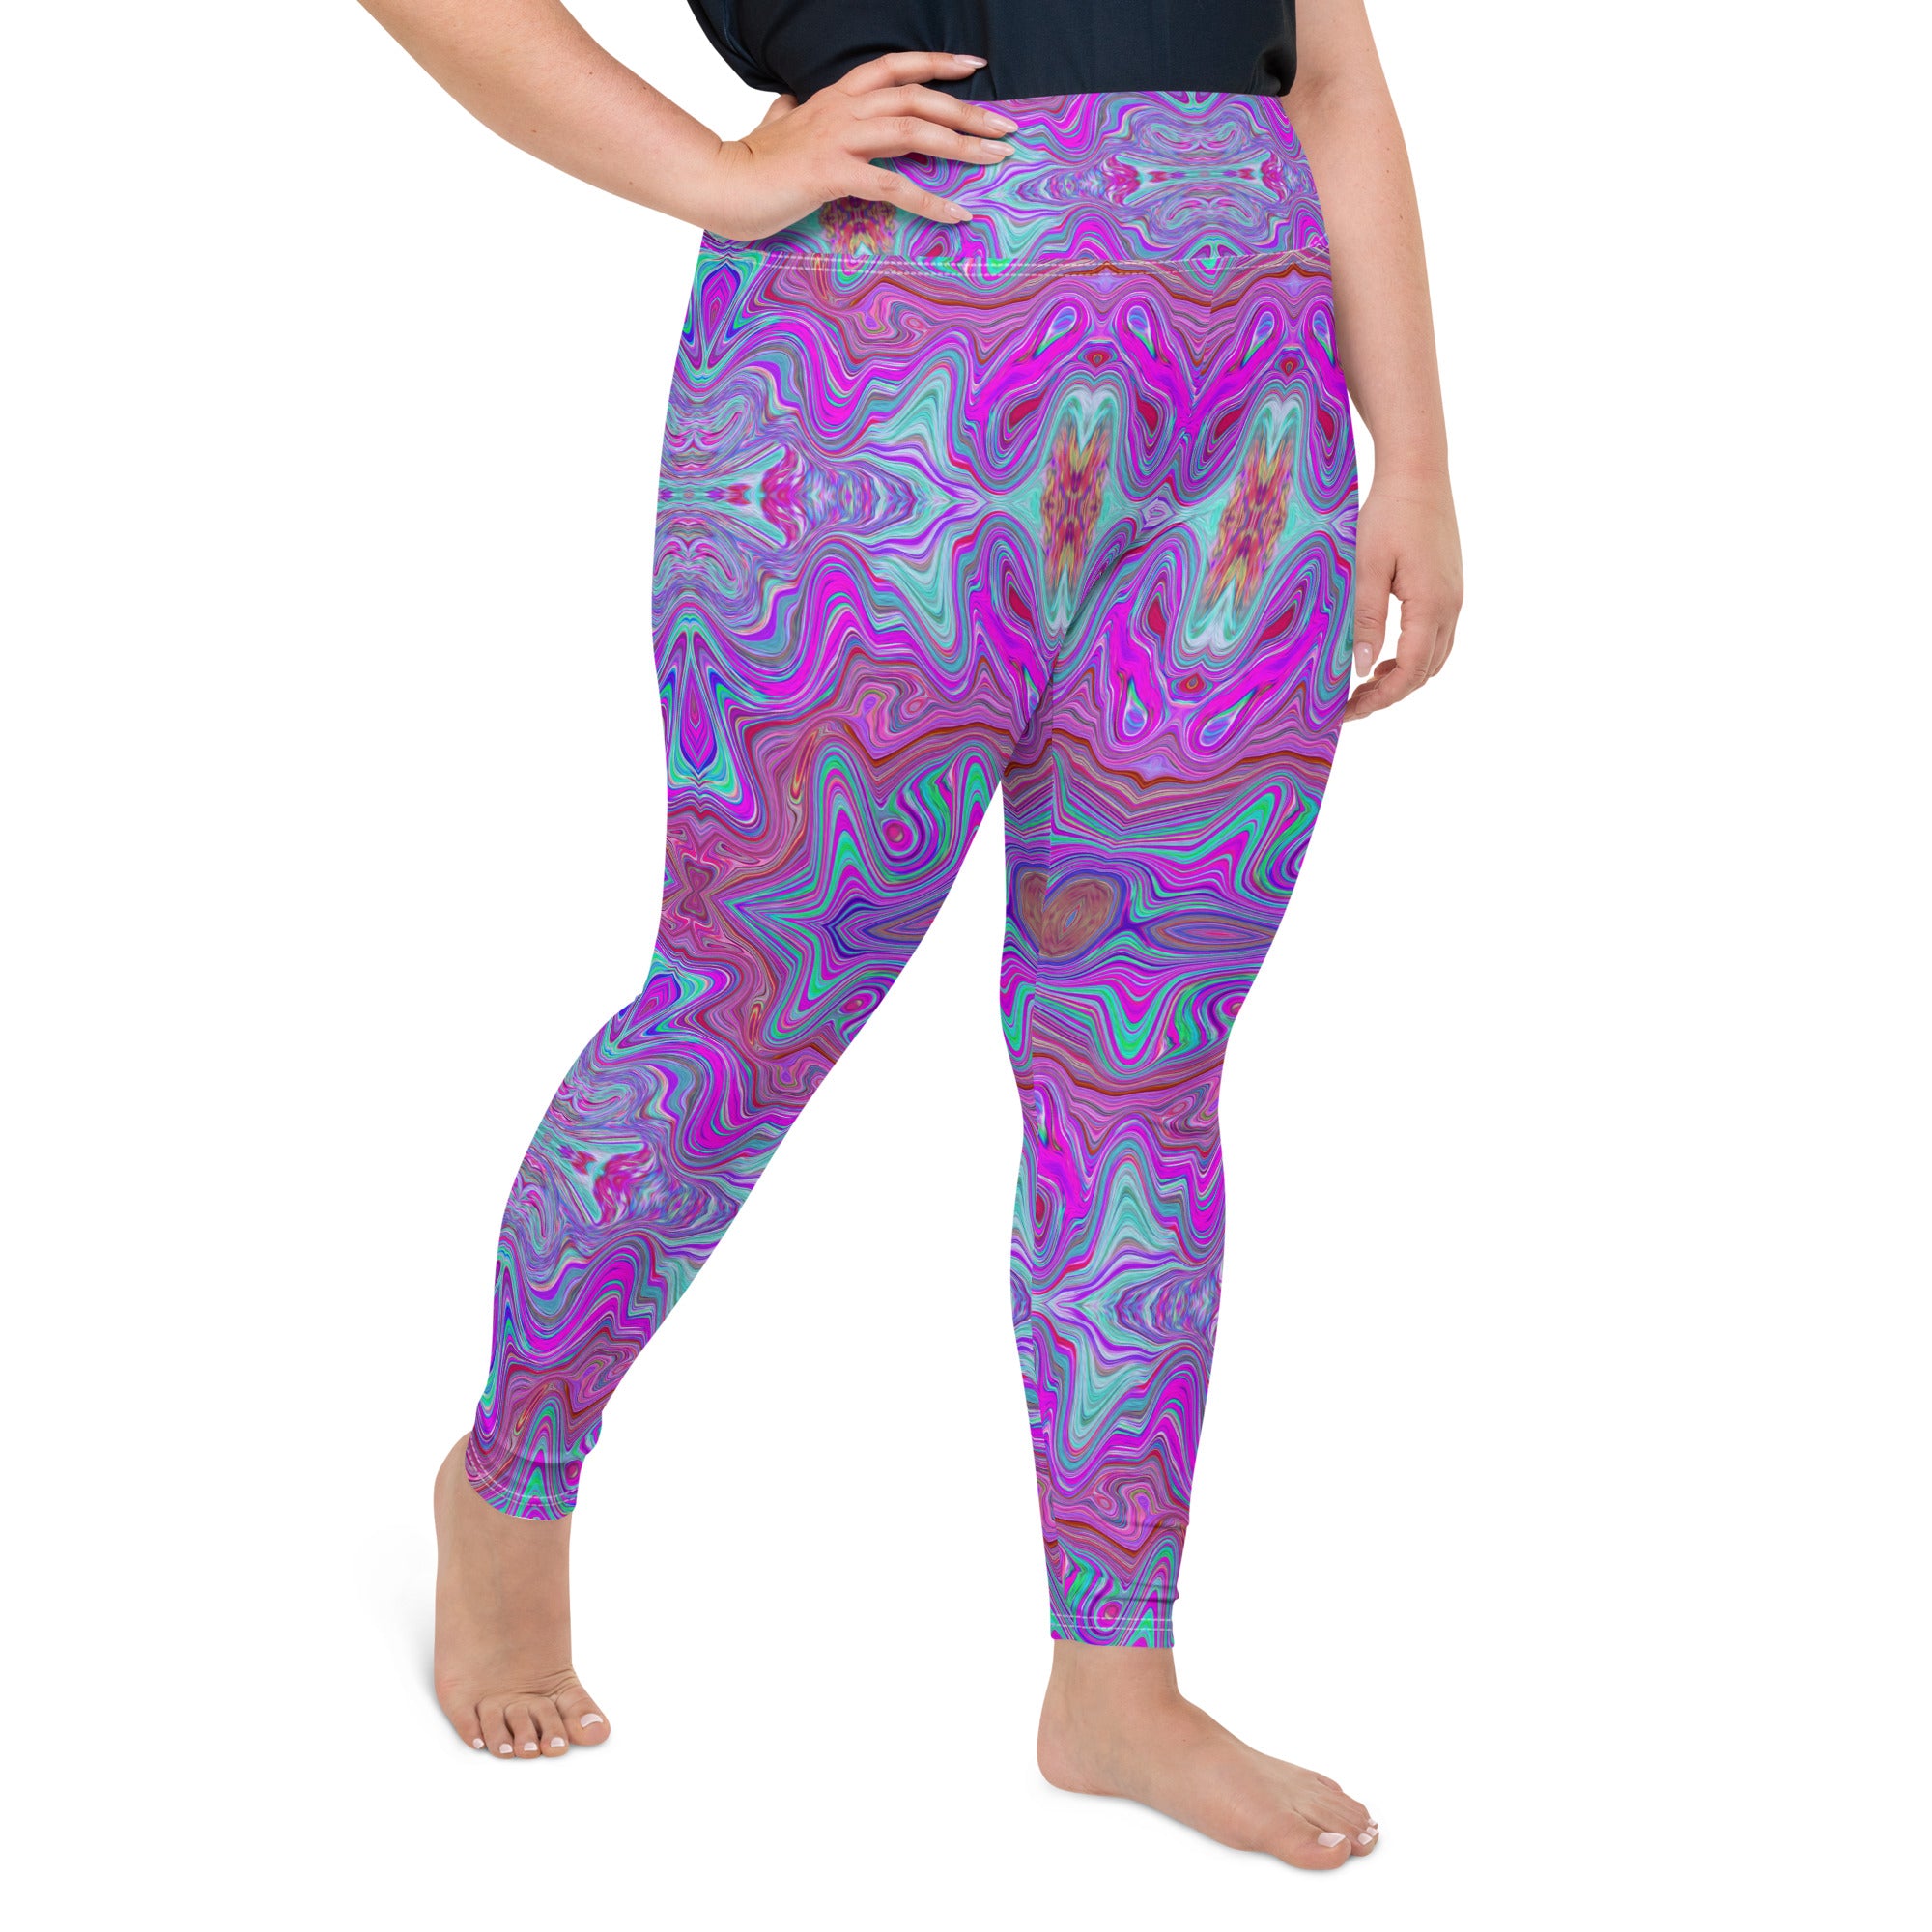 Plus Size Leggings for Women, Wavy Magenta and Blue Trippy Marbled Pattern